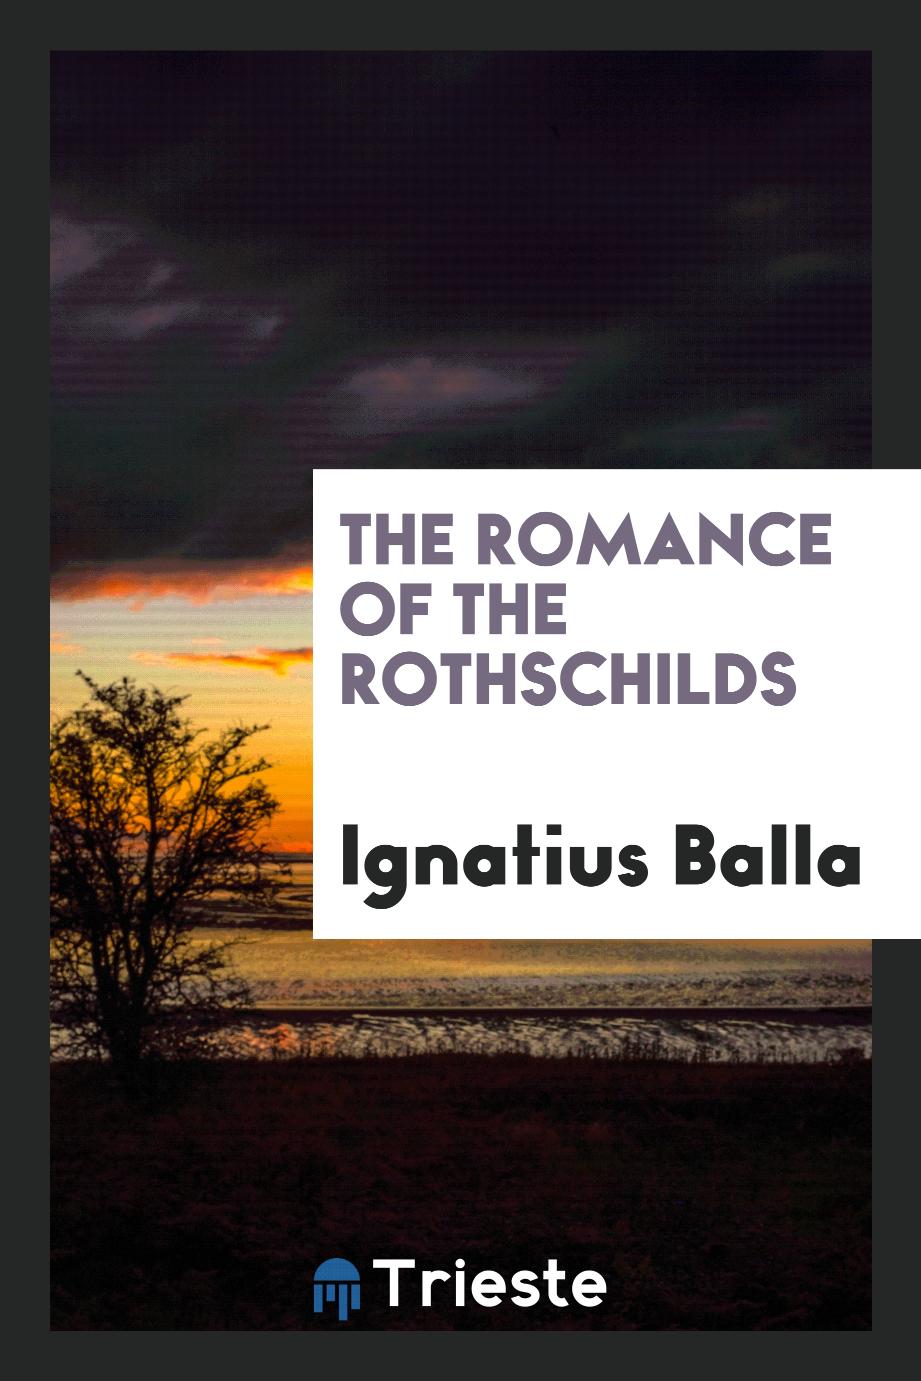 The Romance of the Rothschilds